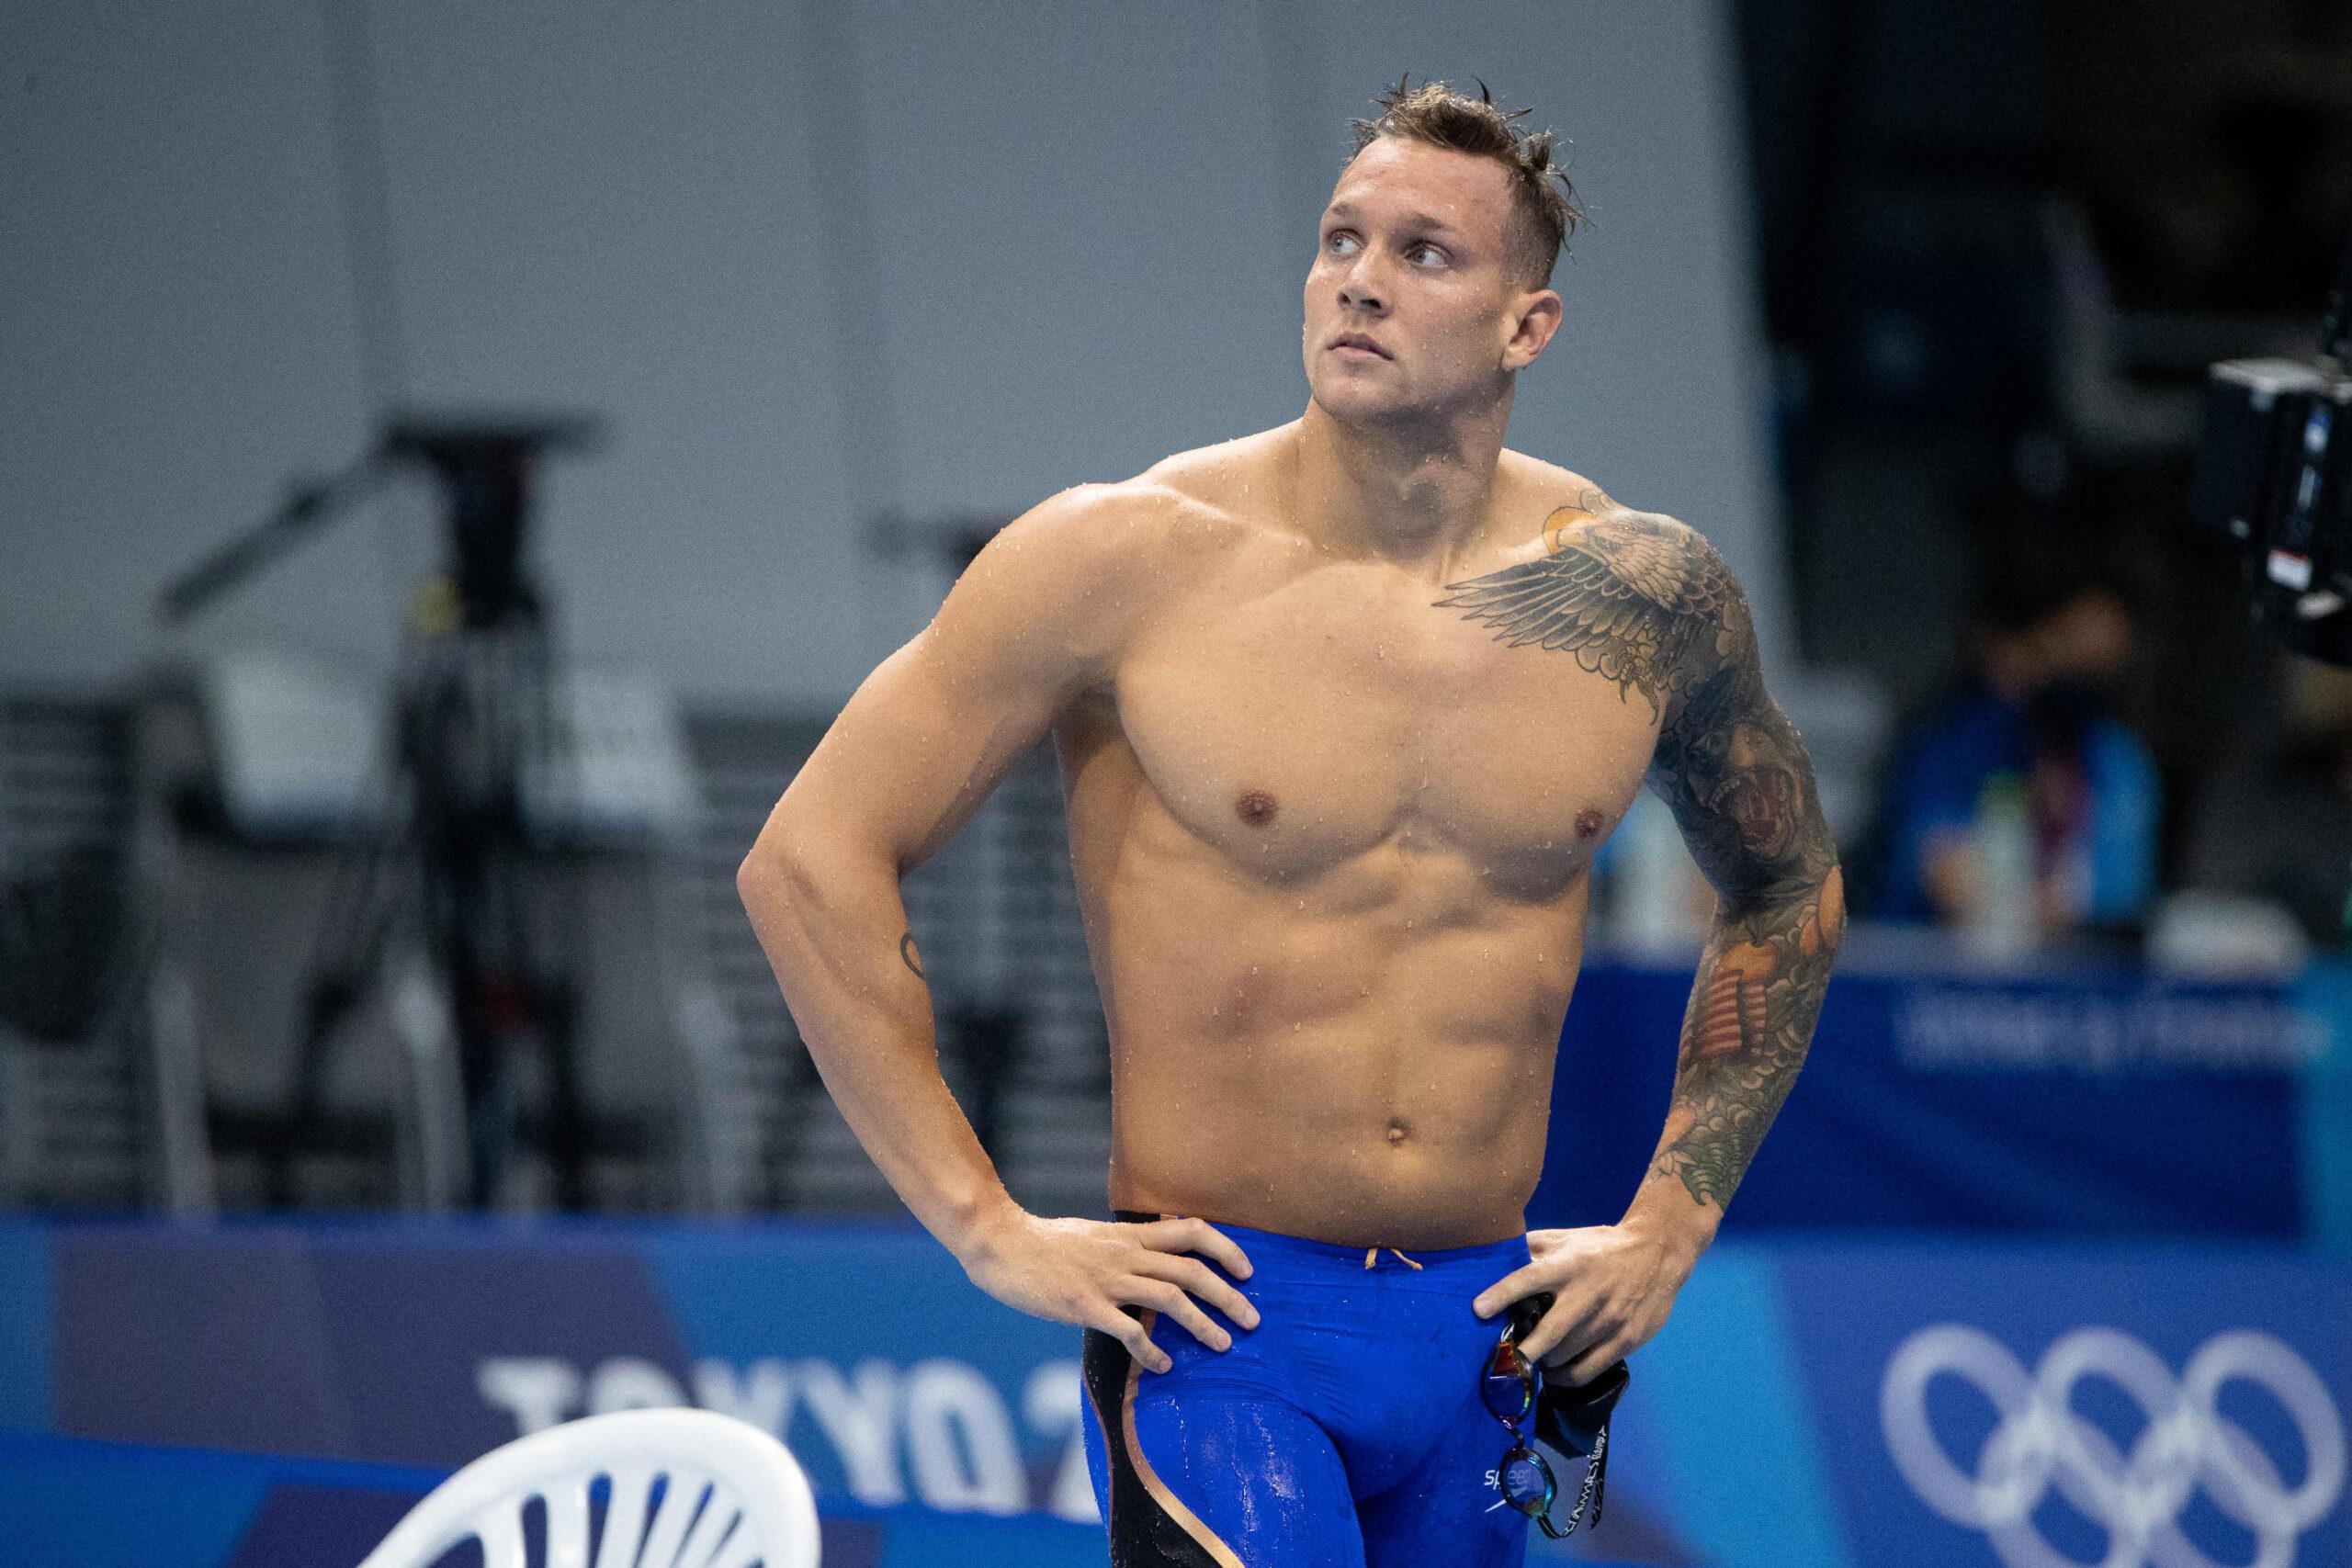 Caeleb Dressel of (USA) looks at scoreboard after swimming in the Men's 100m Freestyle Semifinal 